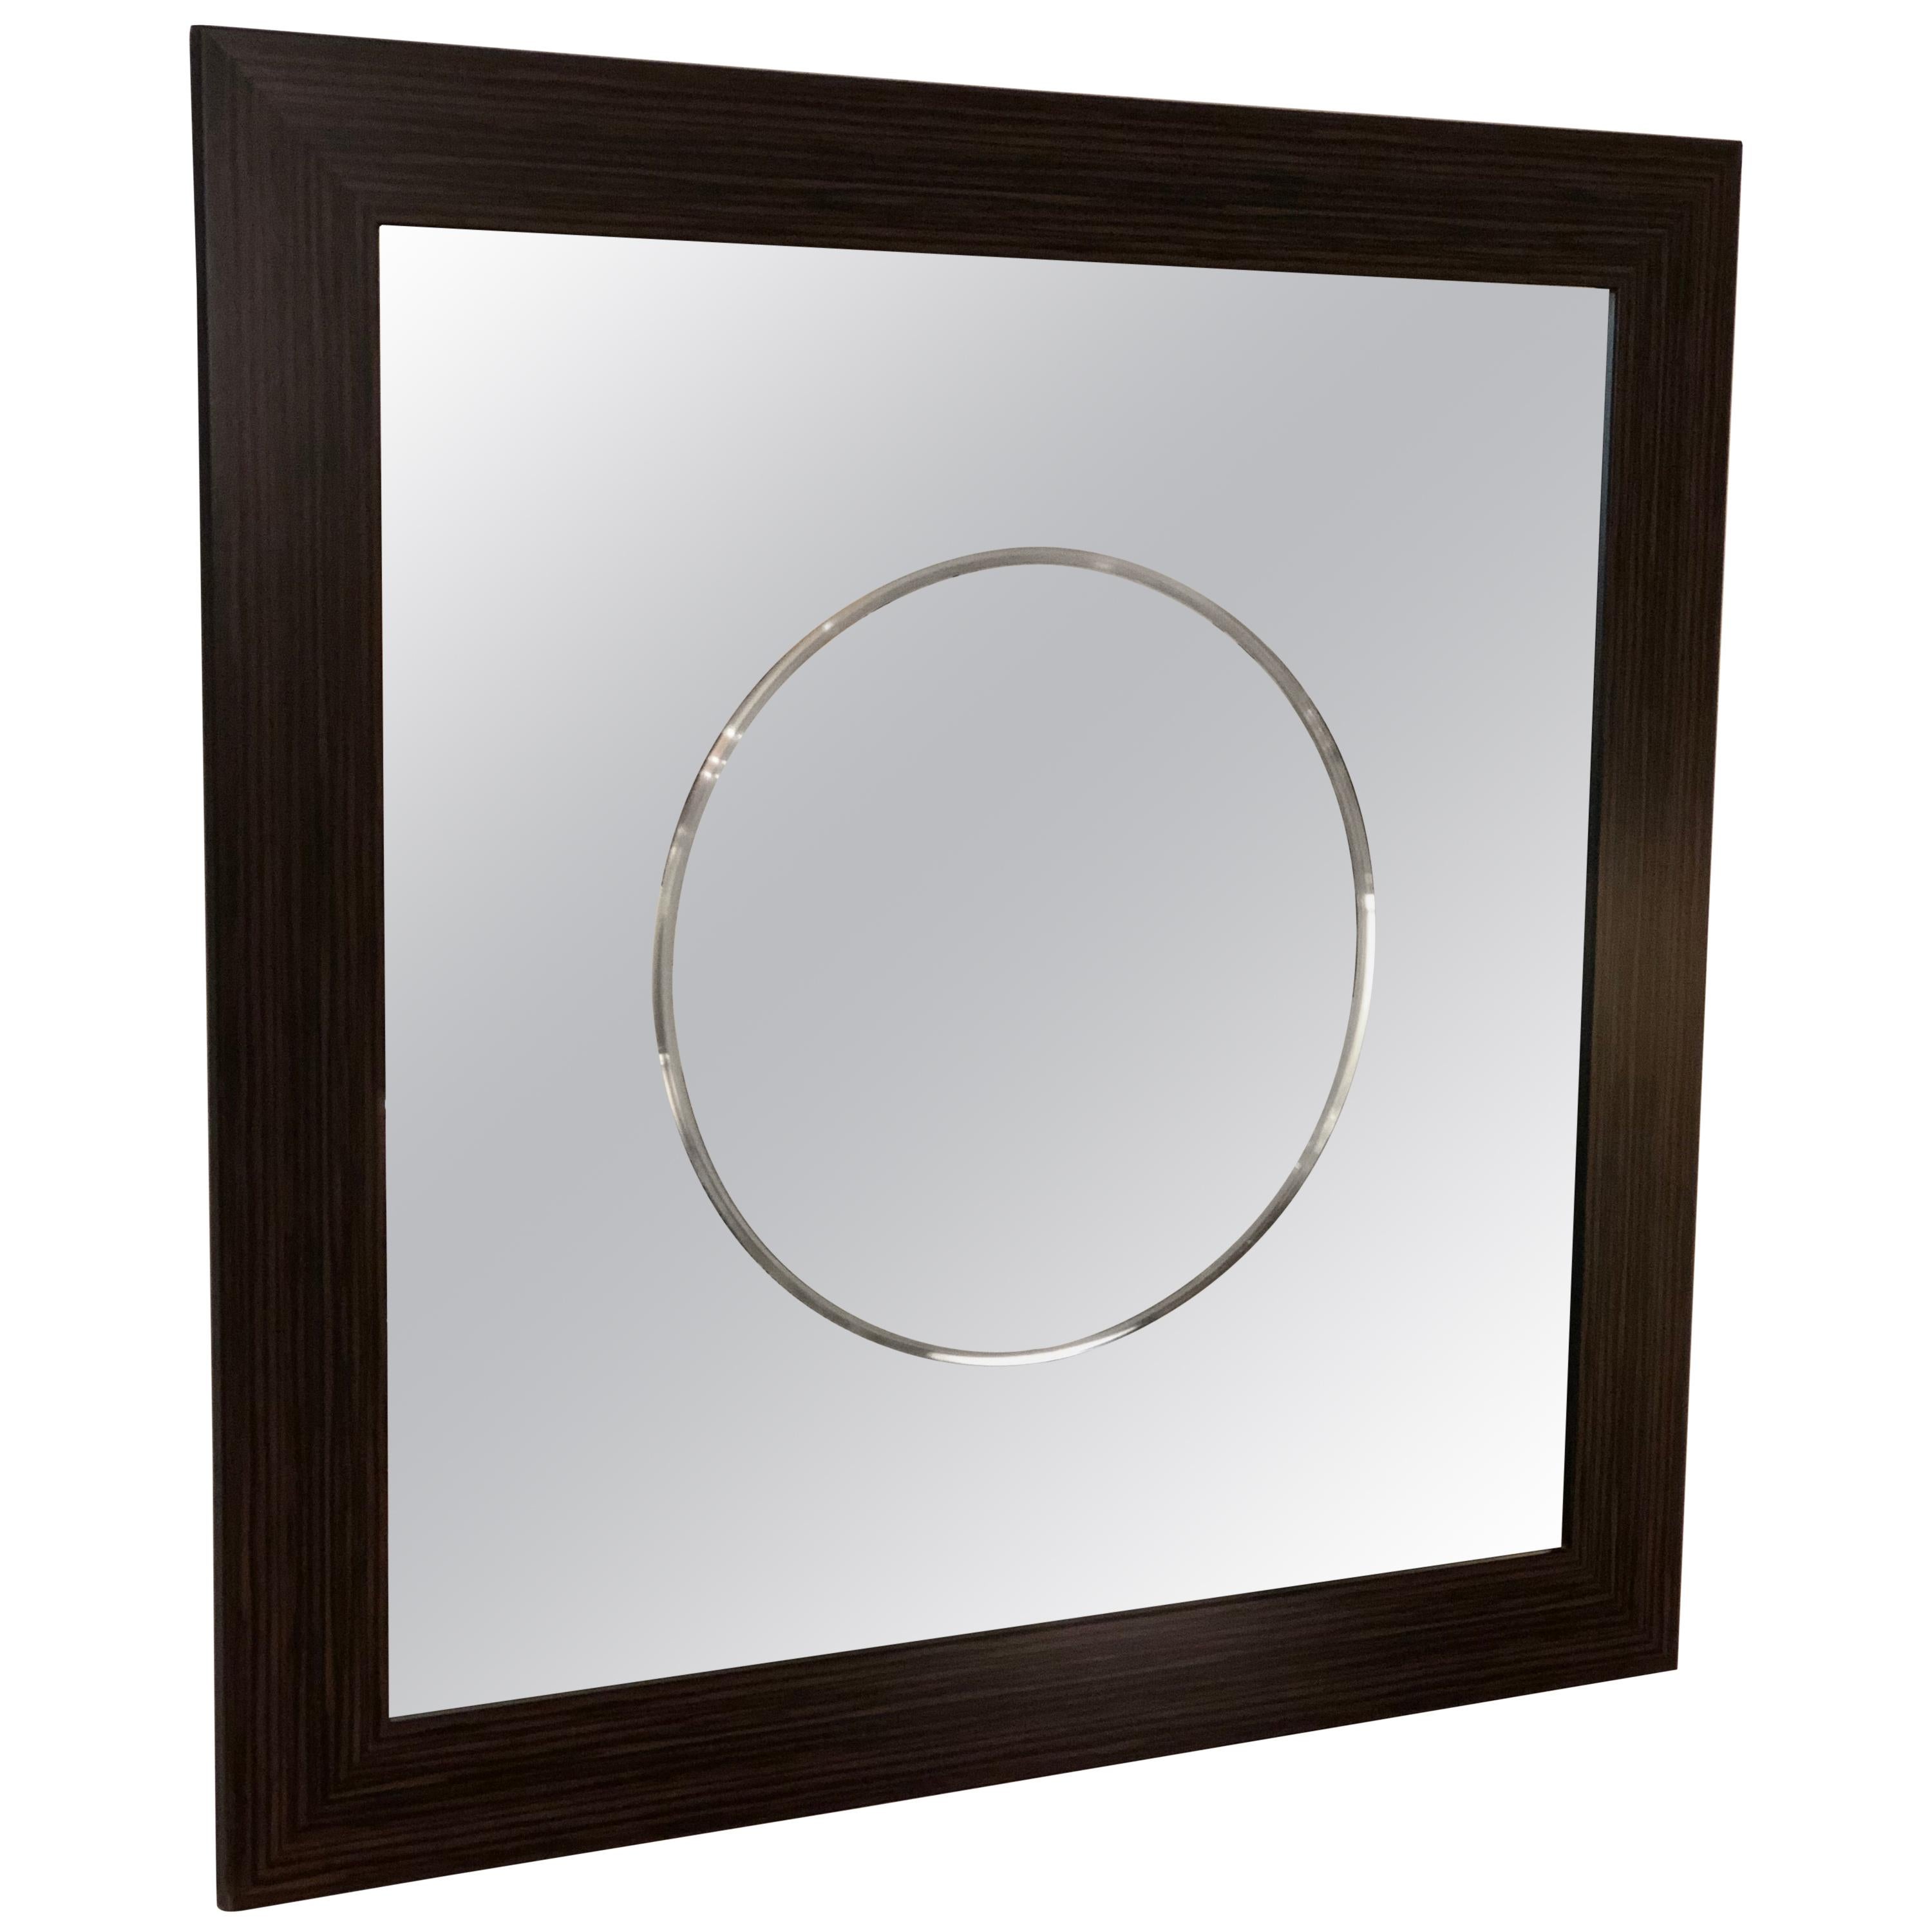 Large Contemporary Mirror with Circle Motif in Center